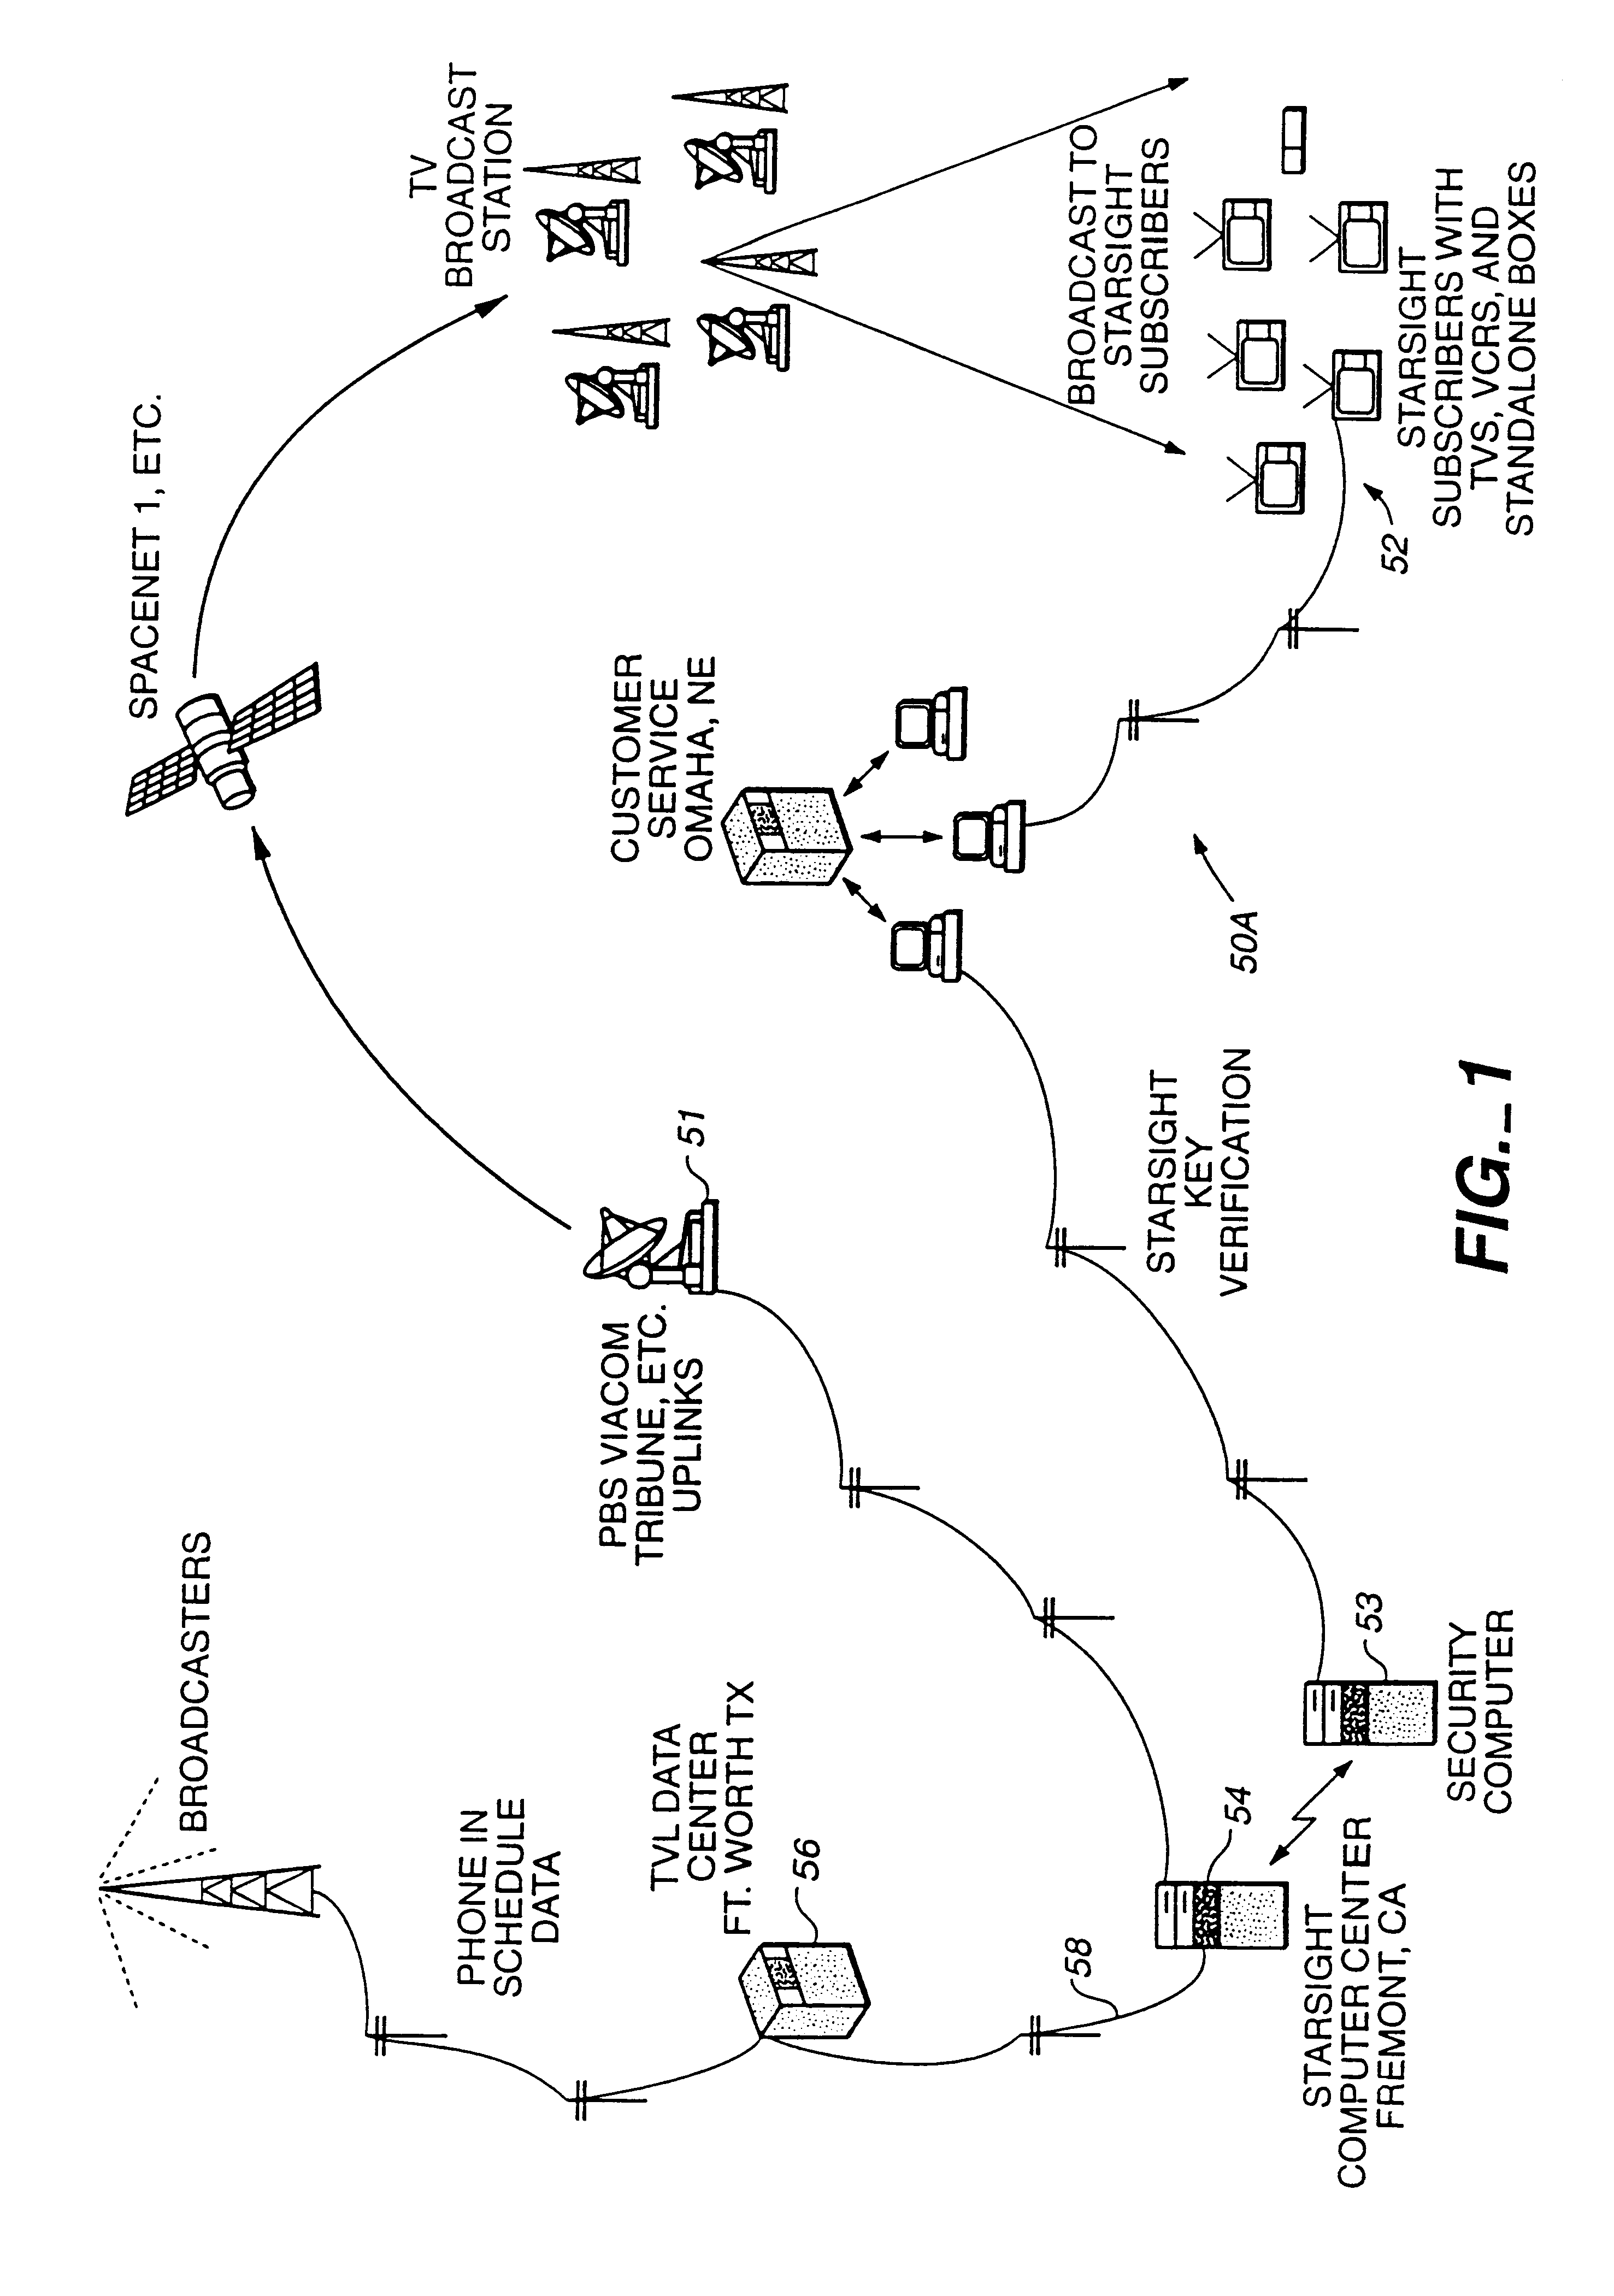 System and method for transmitting and utilizing electronic program guide information